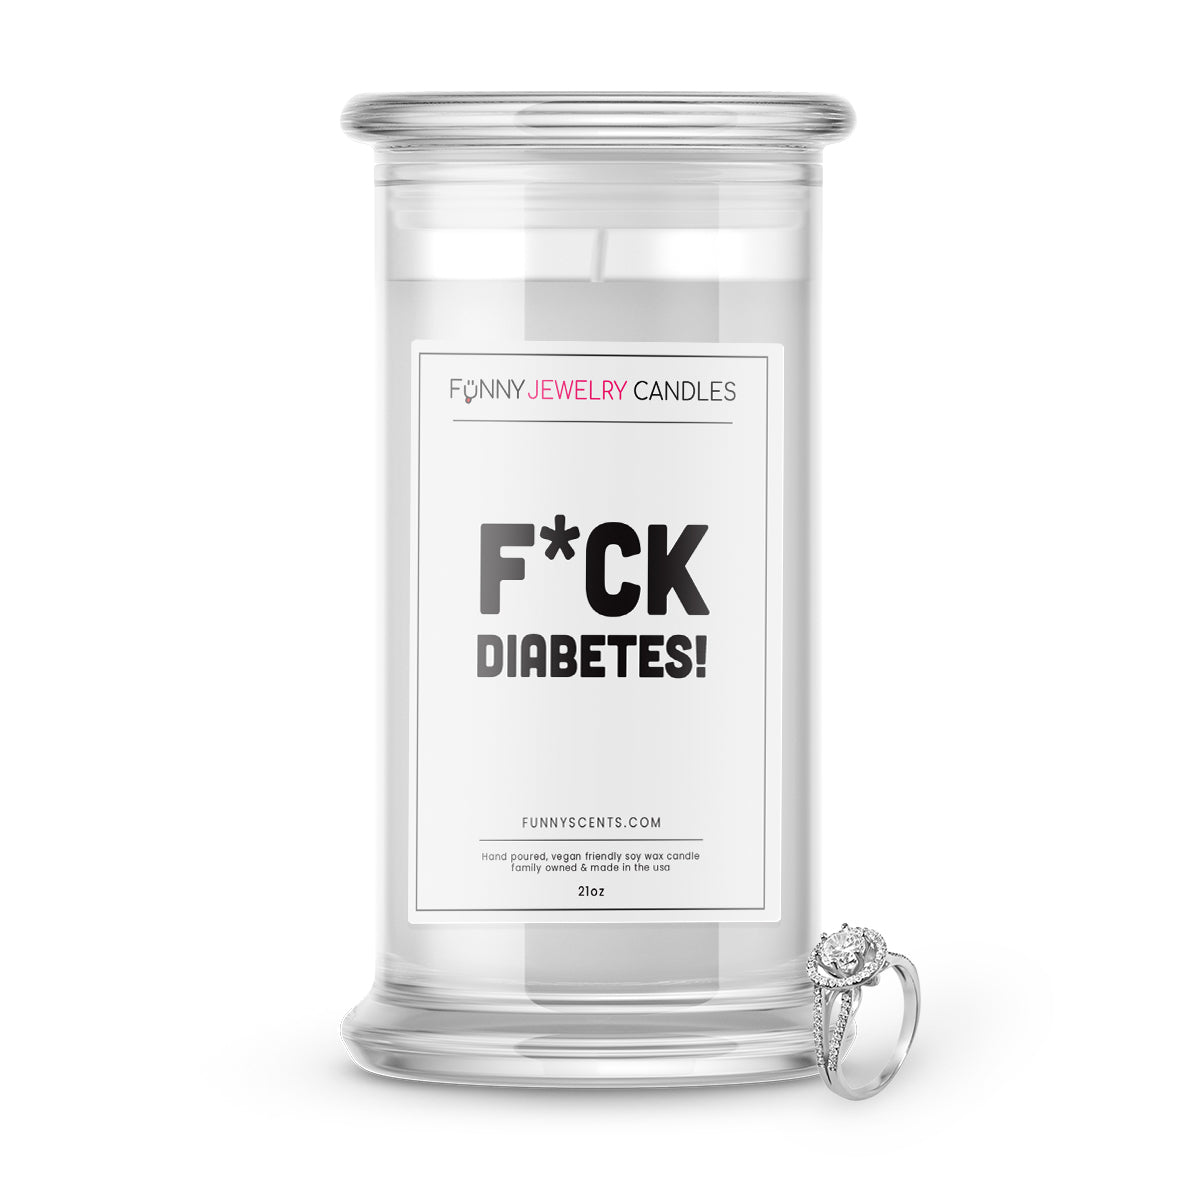 F*ck Diabetes! Jewelry Funny Candles